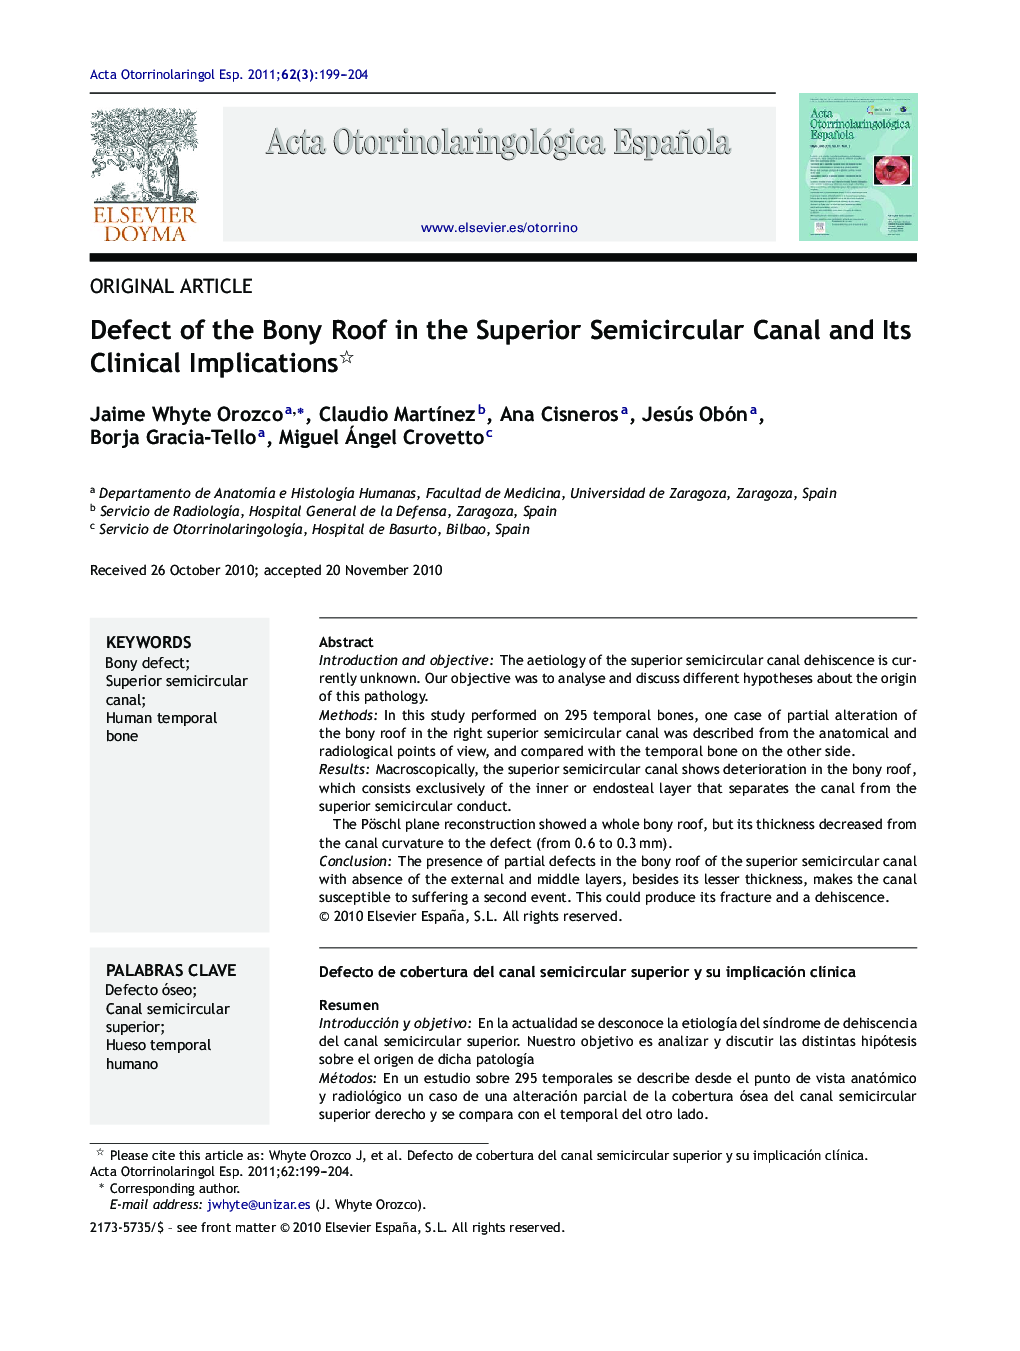 Defect of the Bony Roof in the Superior Semicircular Canal and Its Clinical Implications 